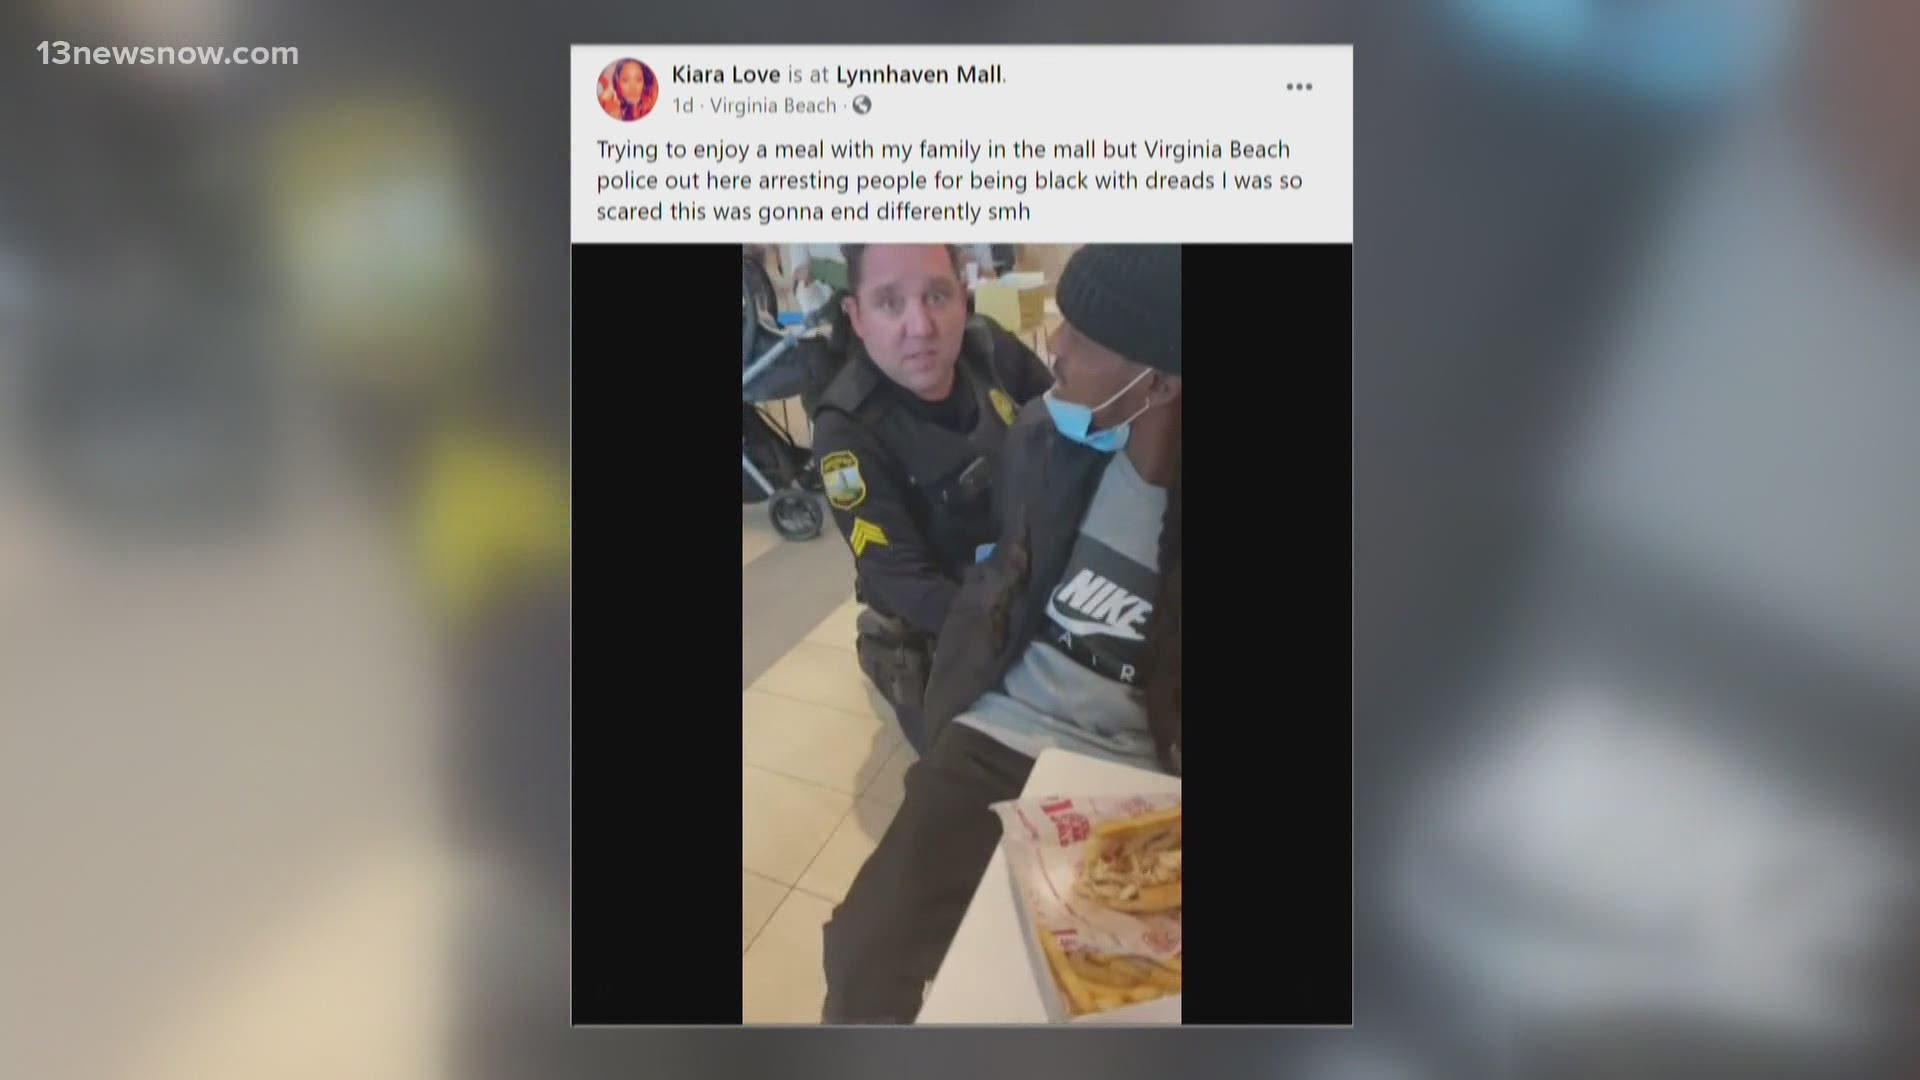 Police were investigating a report of credit card theft when they cuffed Jamar Mackey in the mall's food court in front of his family. They had the wrong person.